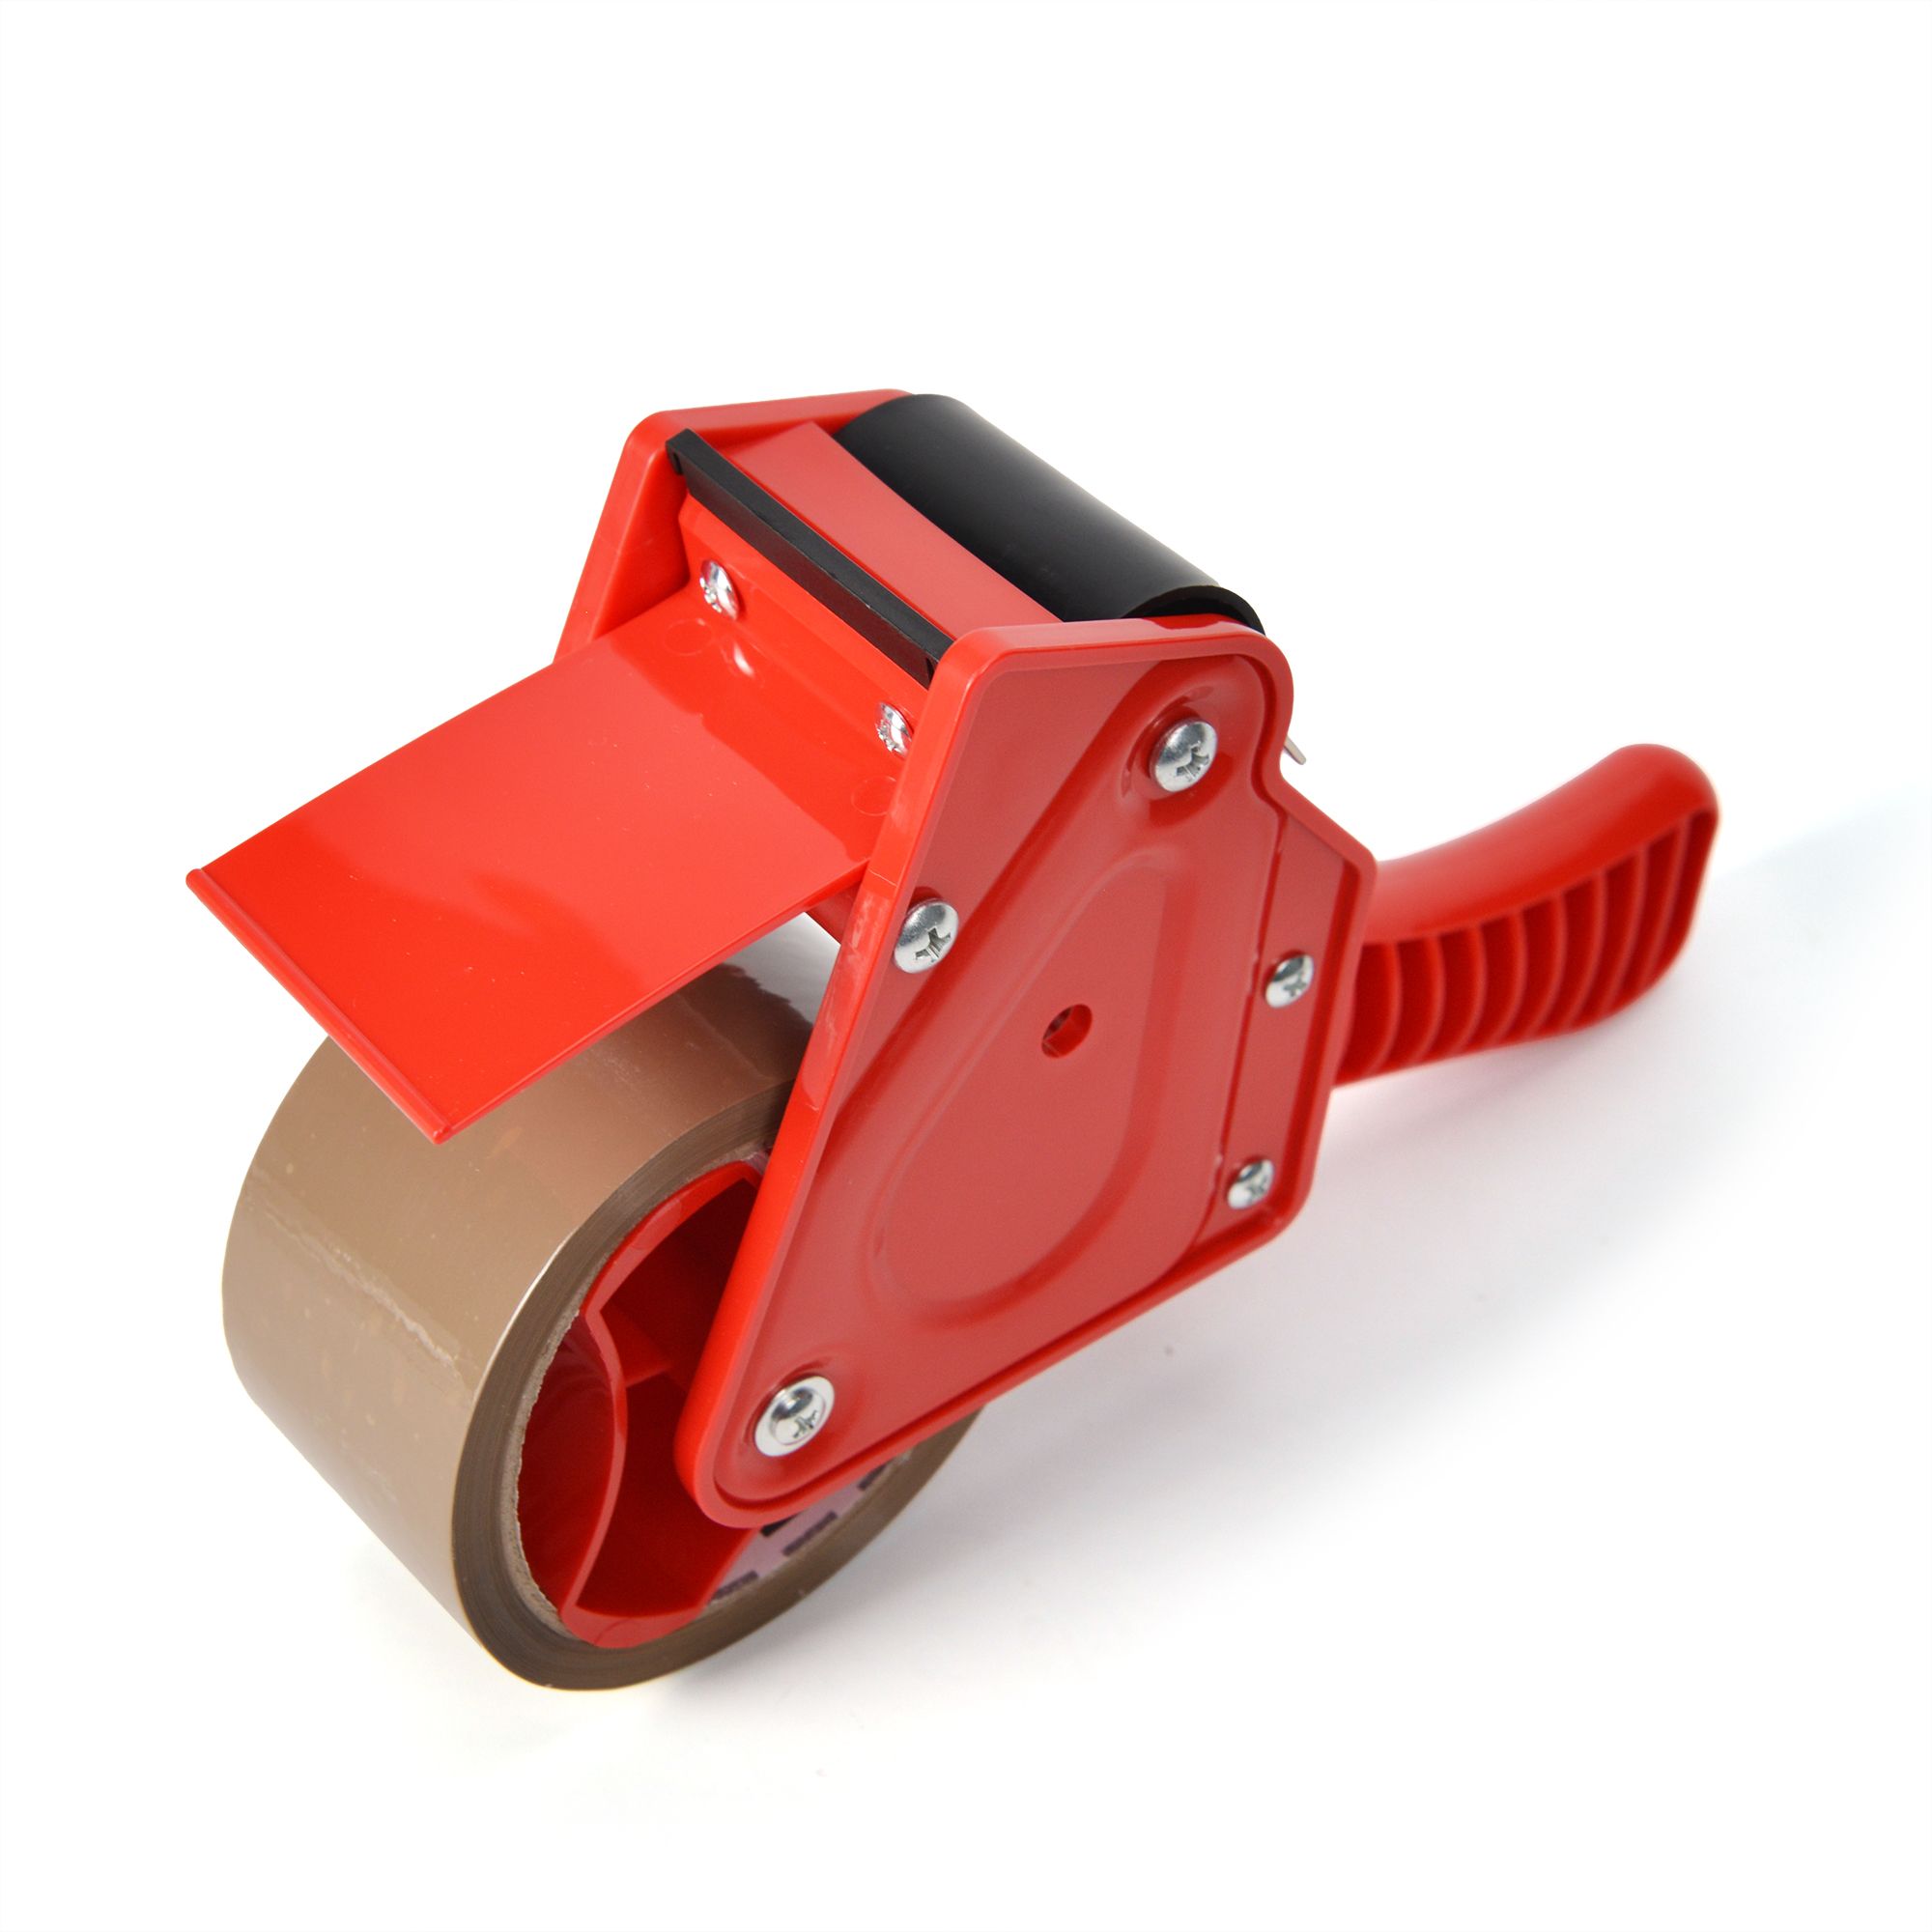 Diall 50mm Tape dispenser with 50m packing tape